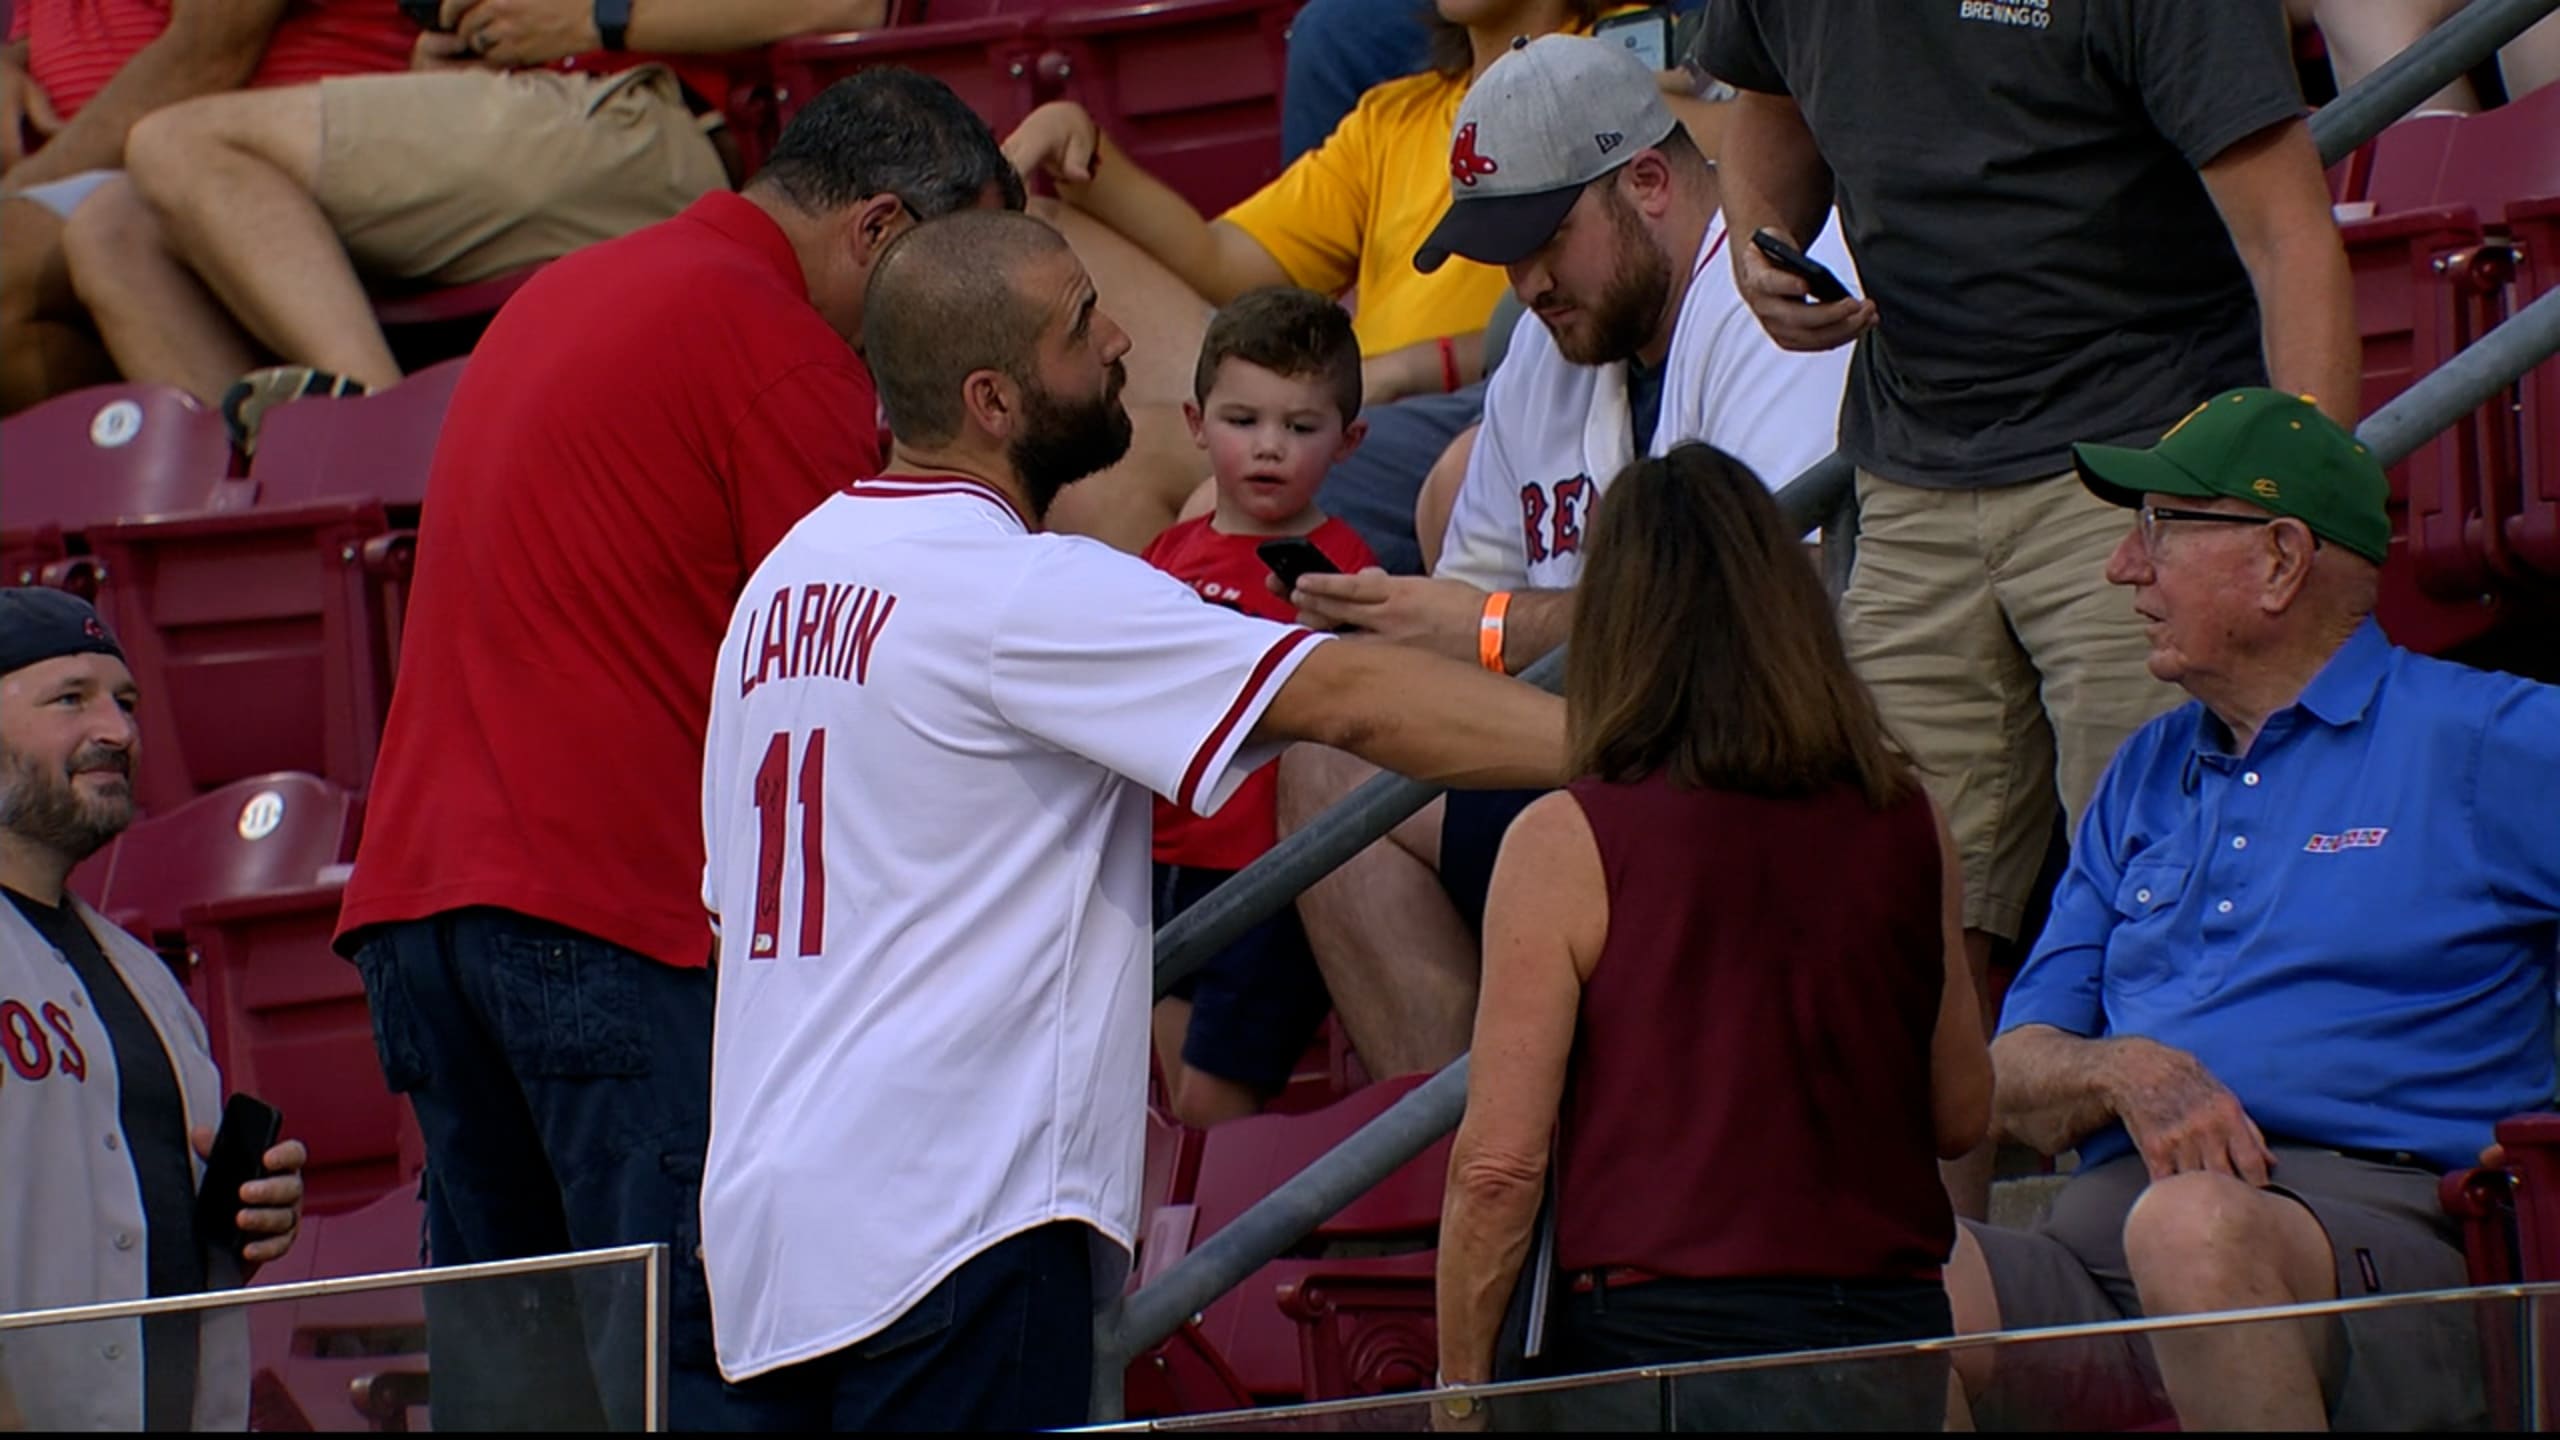 WATCH: Reds' Joey Votto wanders the crowd wearing Barry Larkin jersey,  greets fans during game vs. Red Sox 